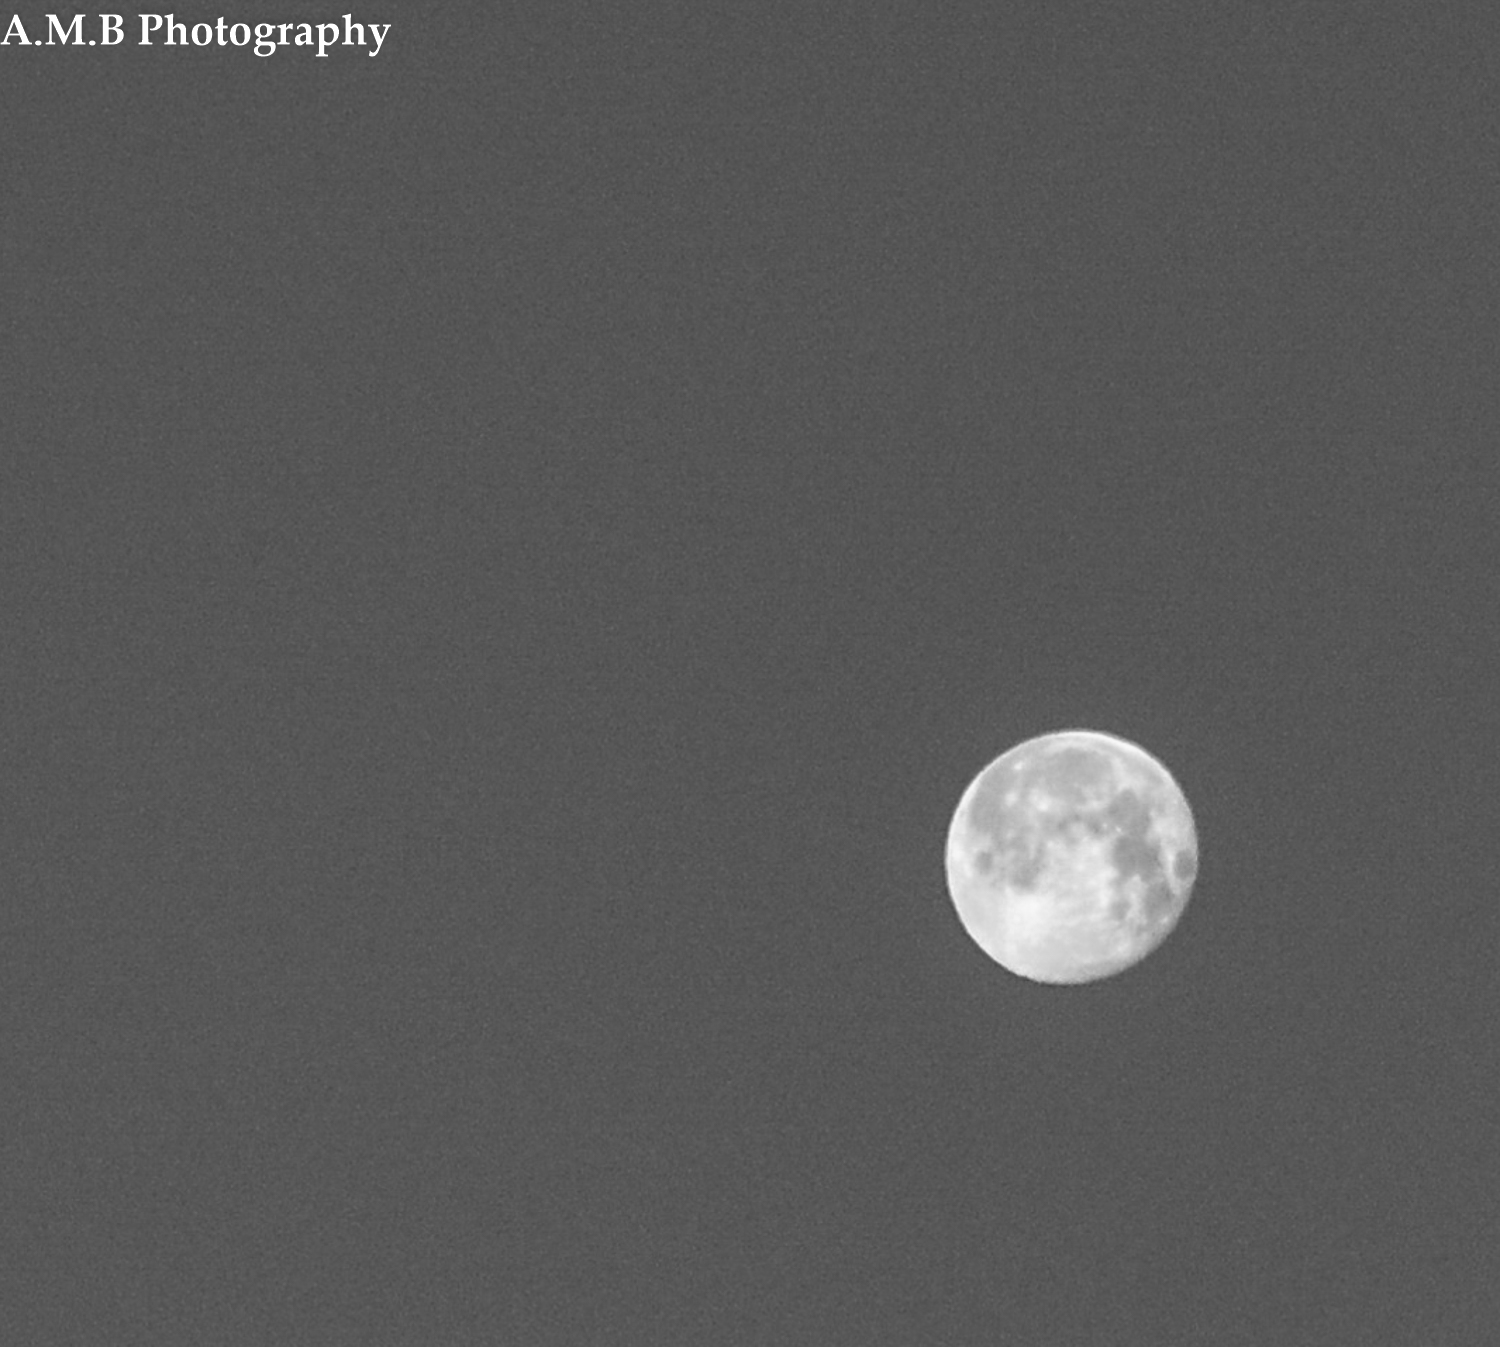 Full Moon Remnants in Black and White